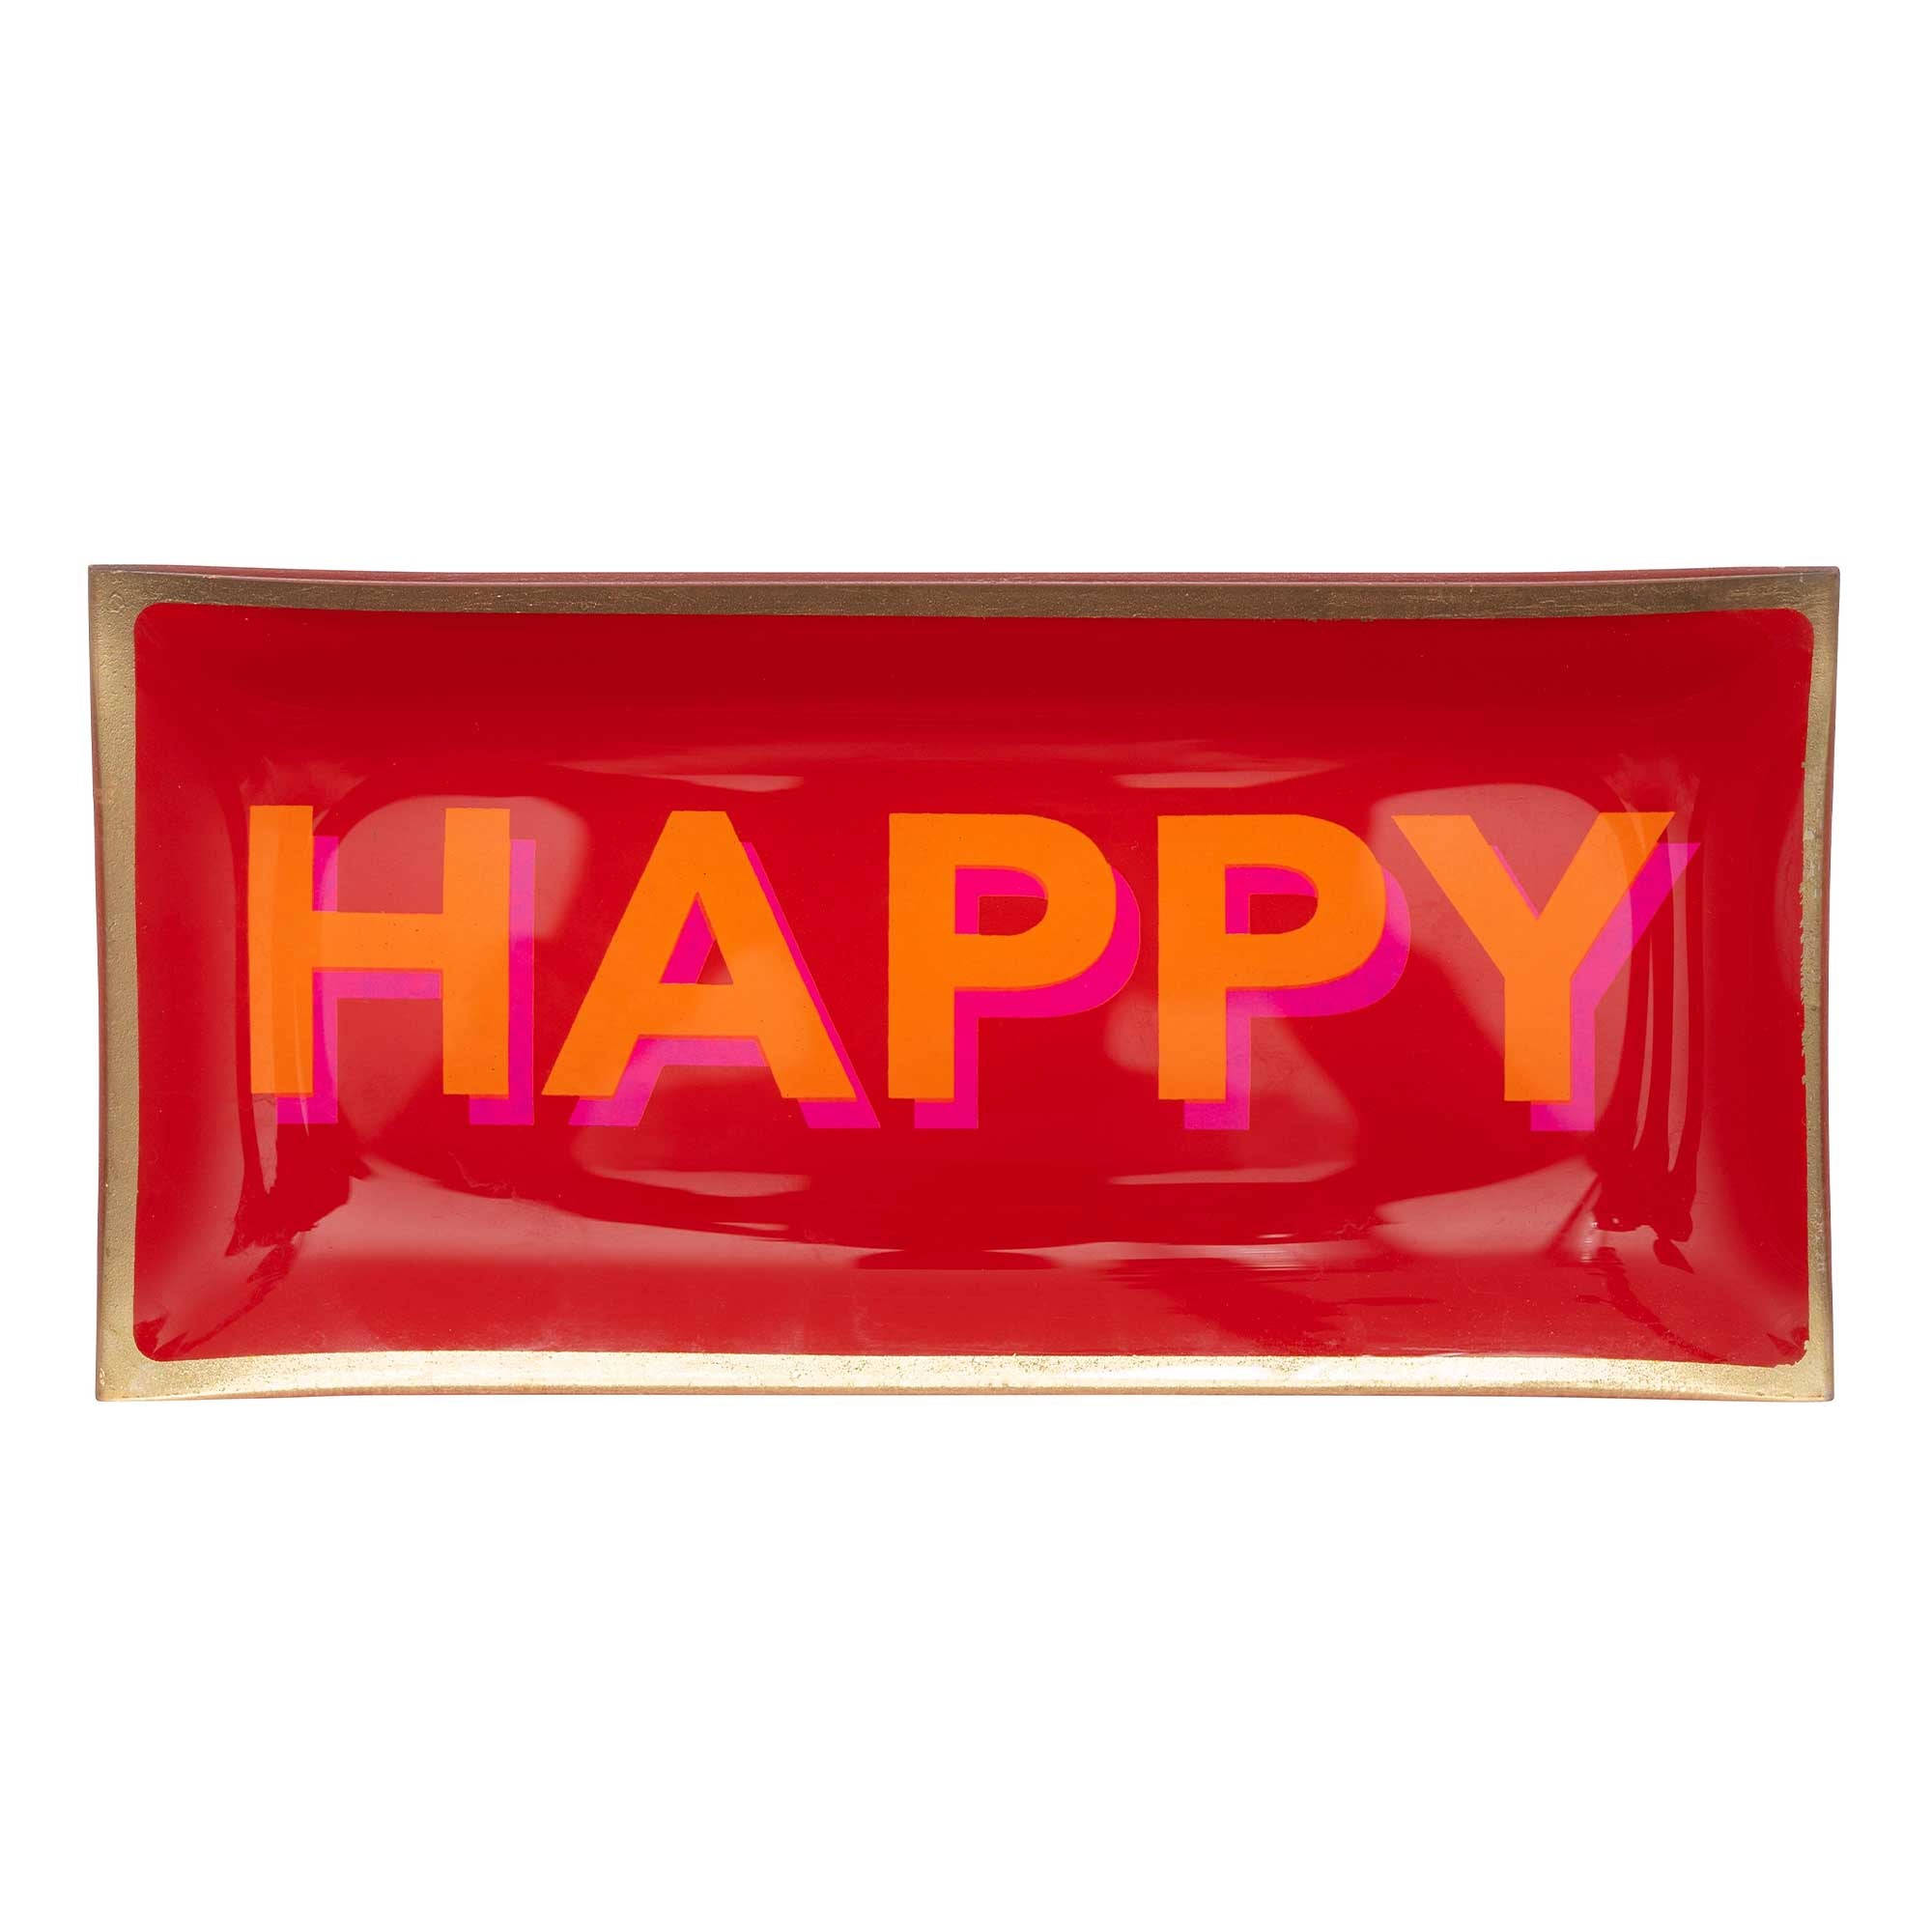 Glass plate "HAPPY" red